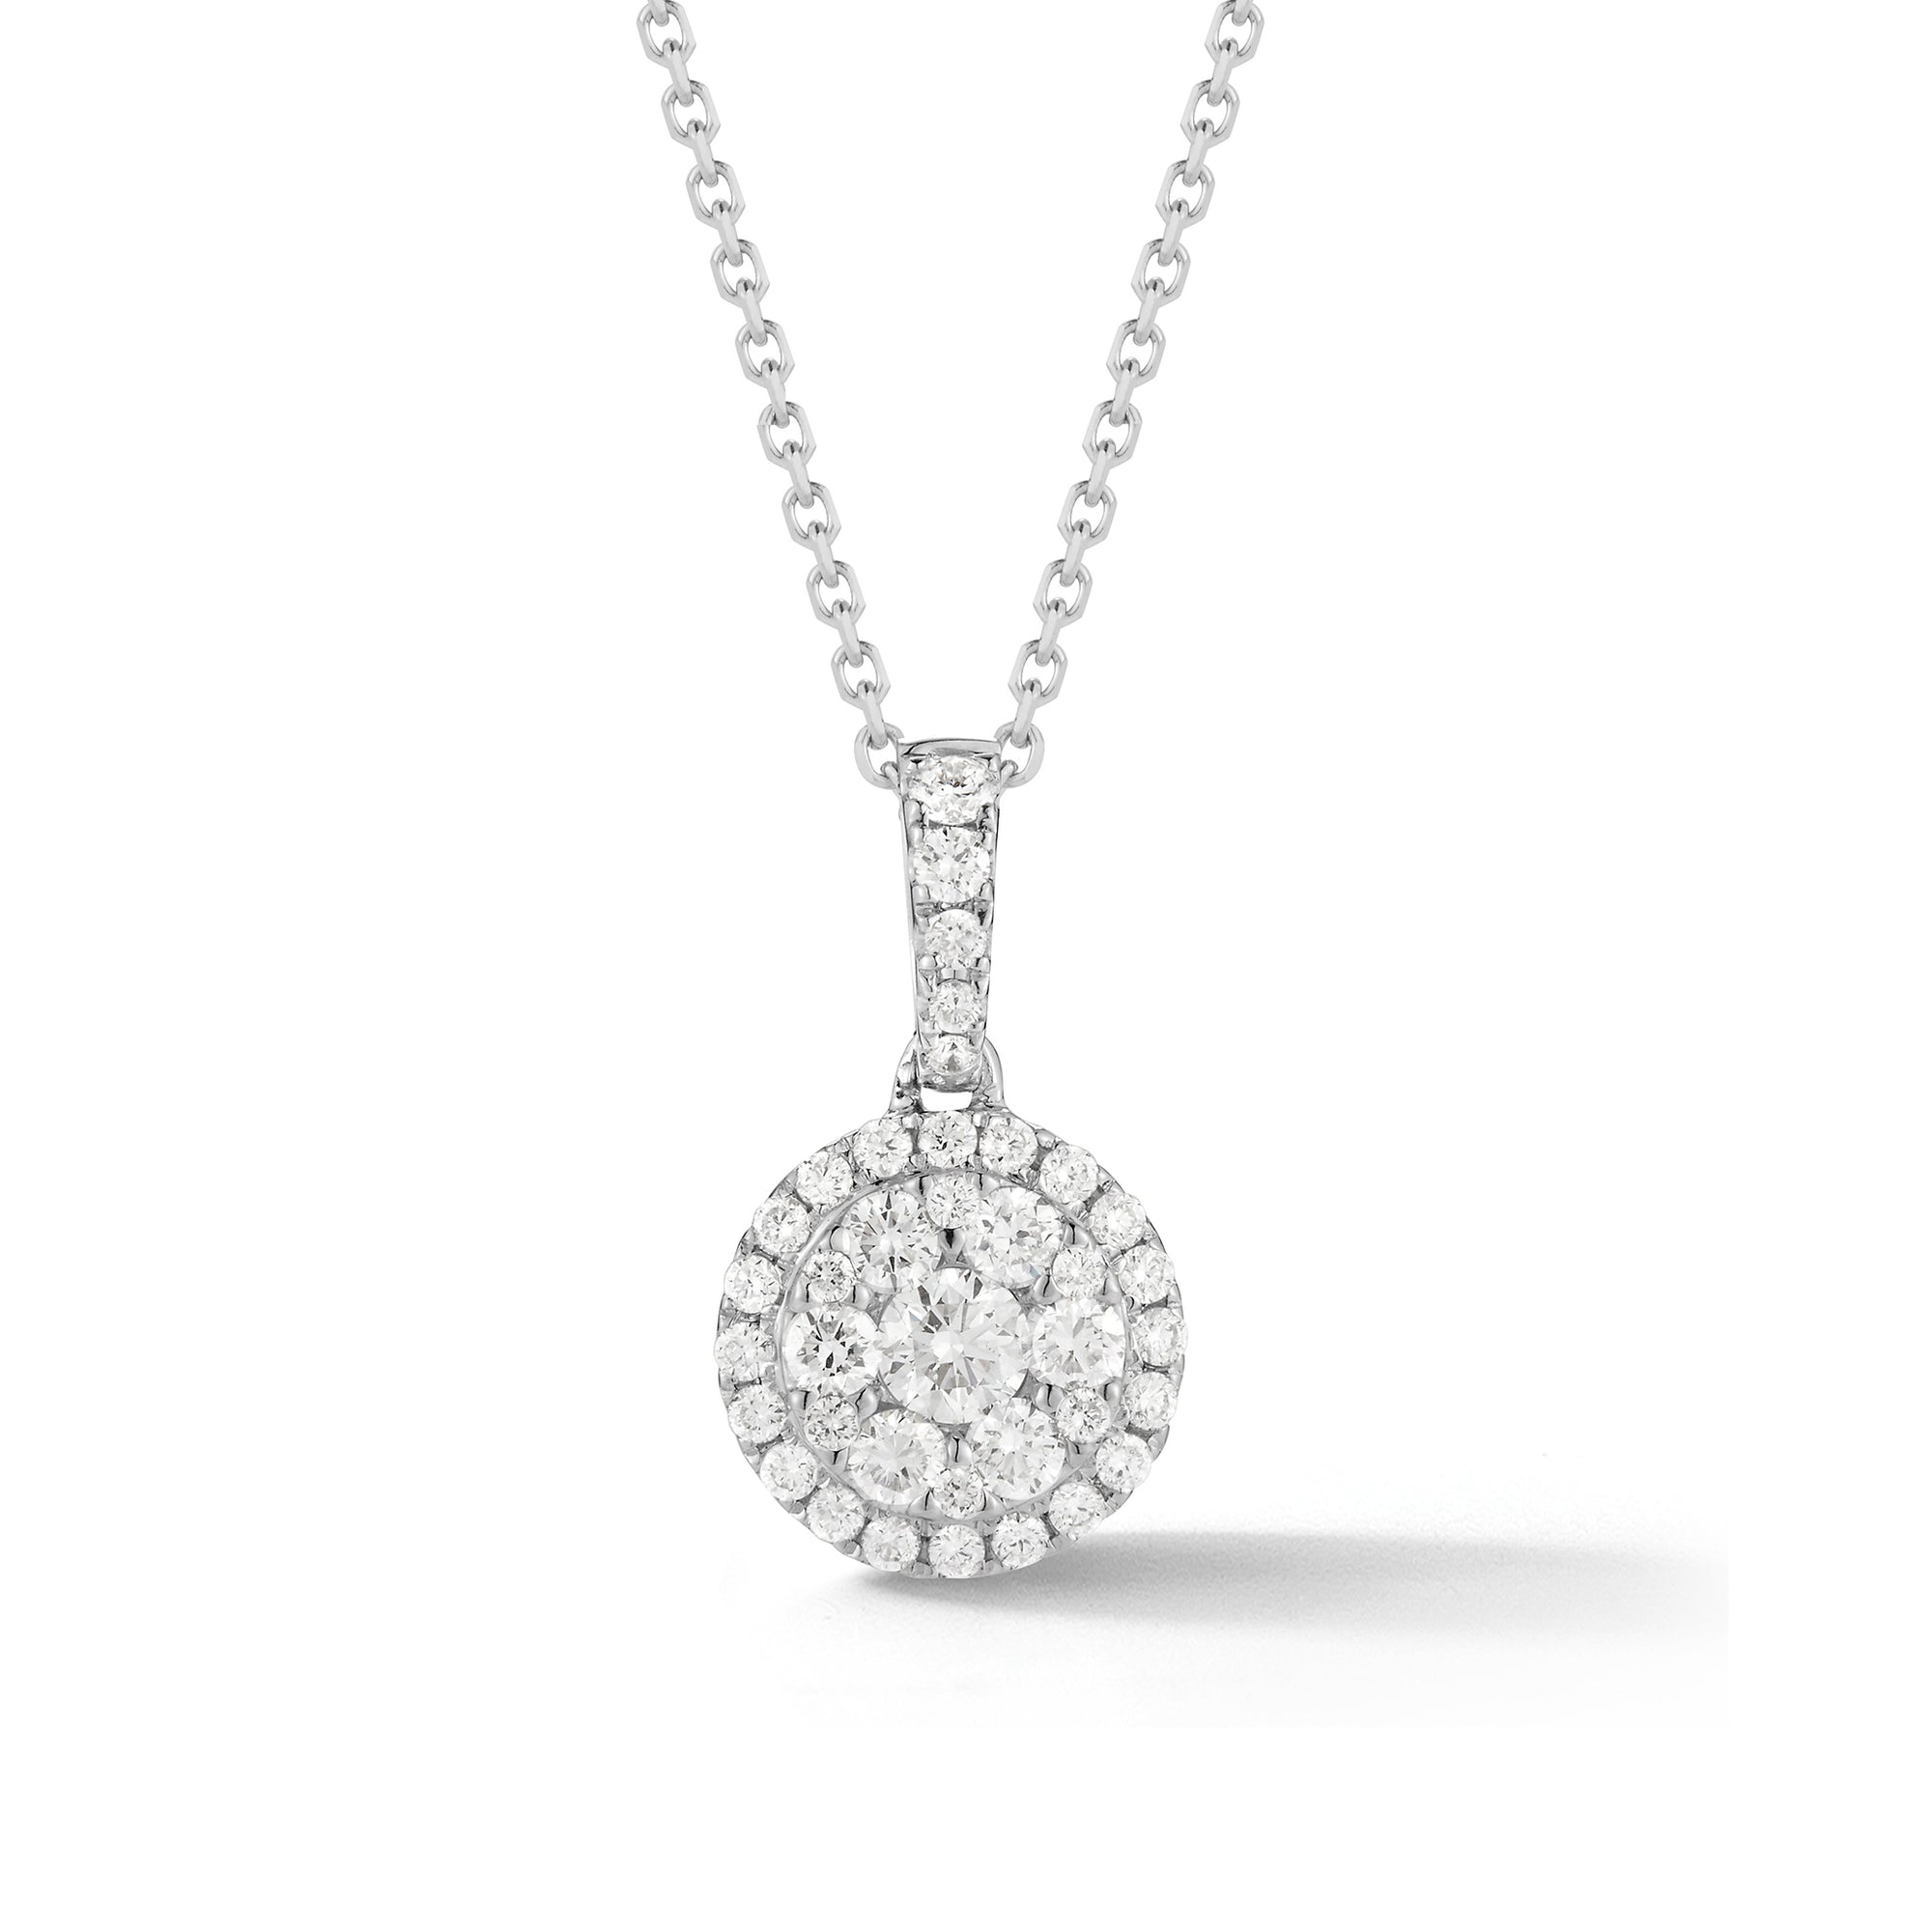 Small Diamond Halo Pendant Necklace  -18K gold weighing 1.09 grams  -38 round pave-set diamonds totaling 0.48 carats  -14K gold chain weighing 1.60 grams